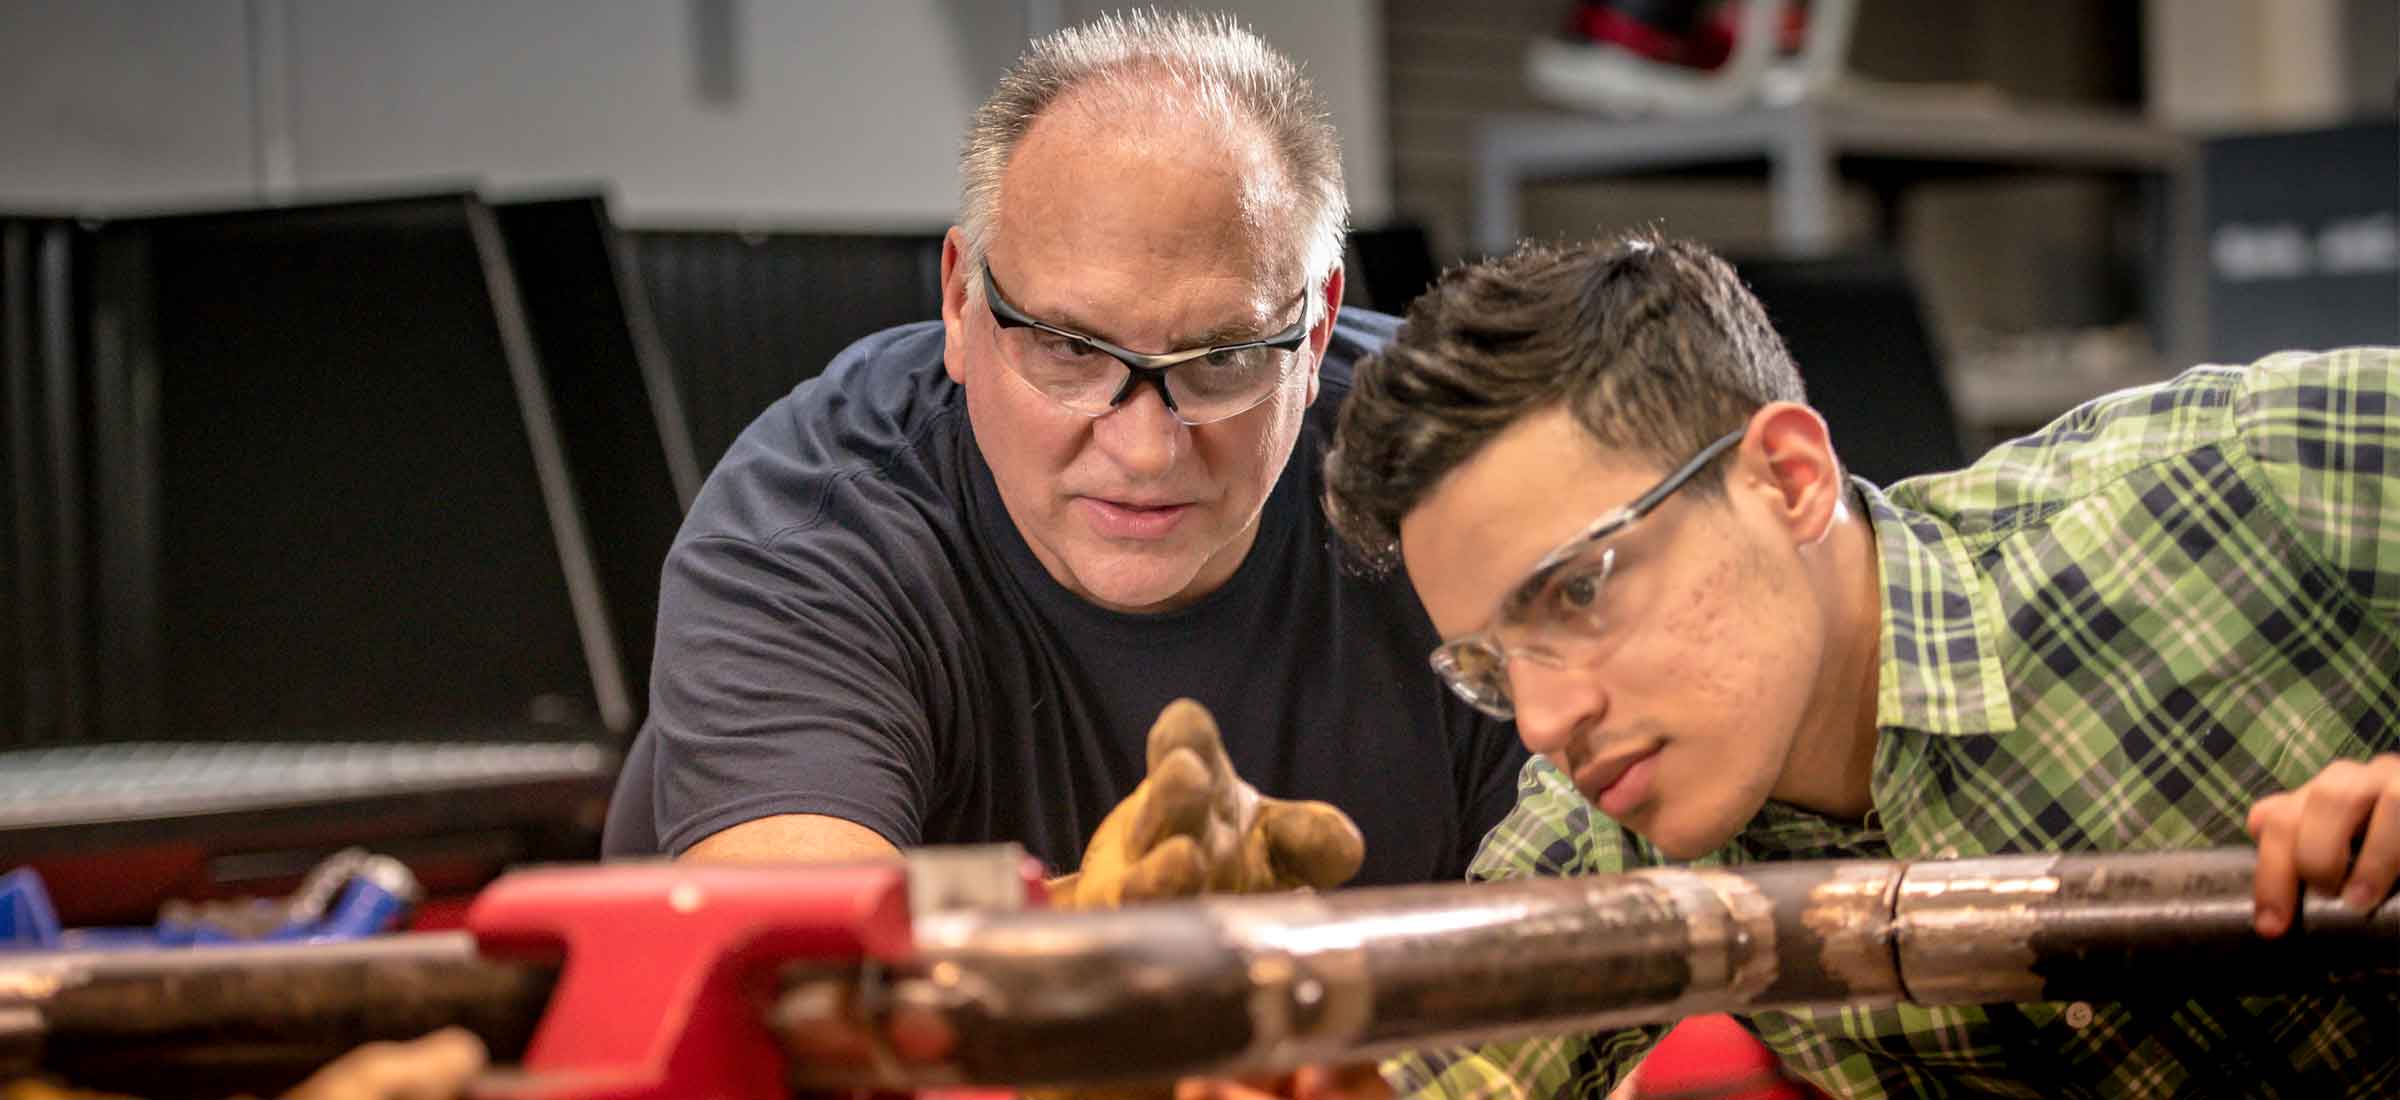 Pipefitting Instructor with Student